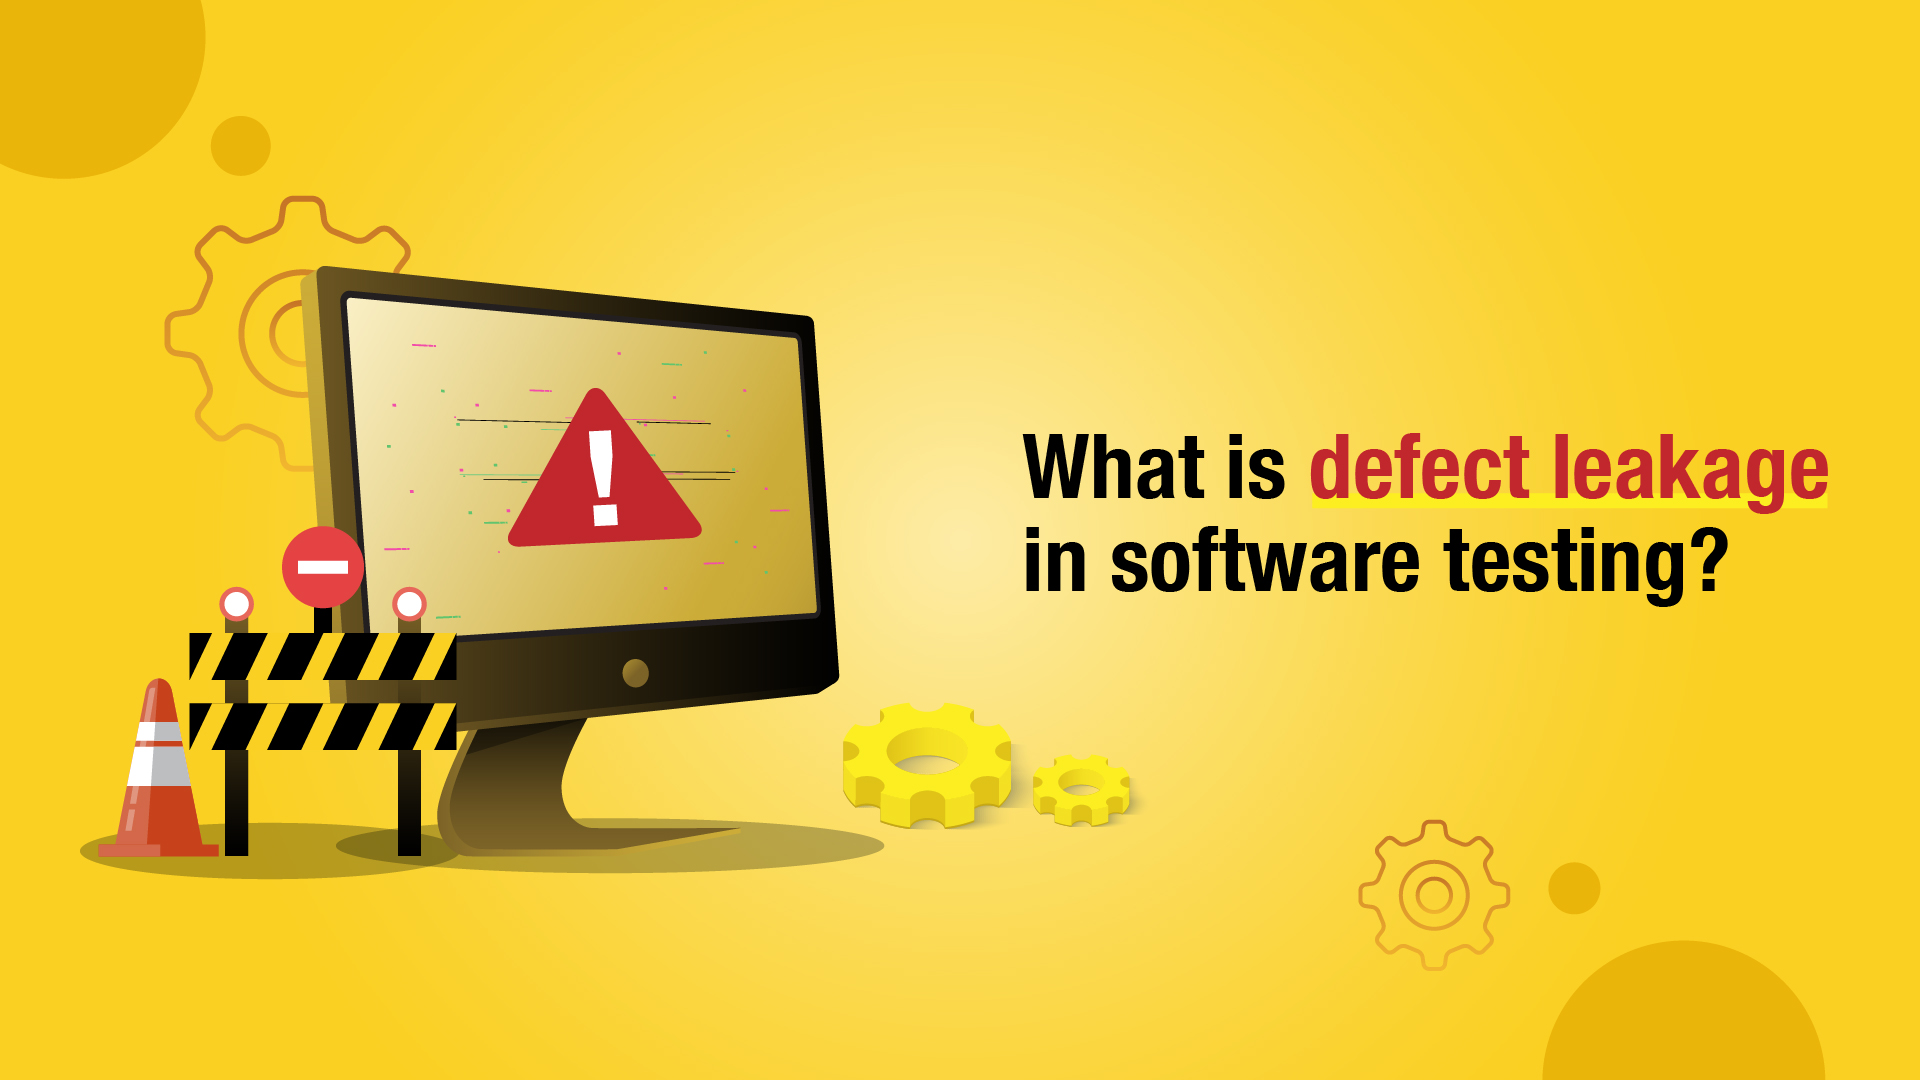 What is Defect Leakage in Software Testing?